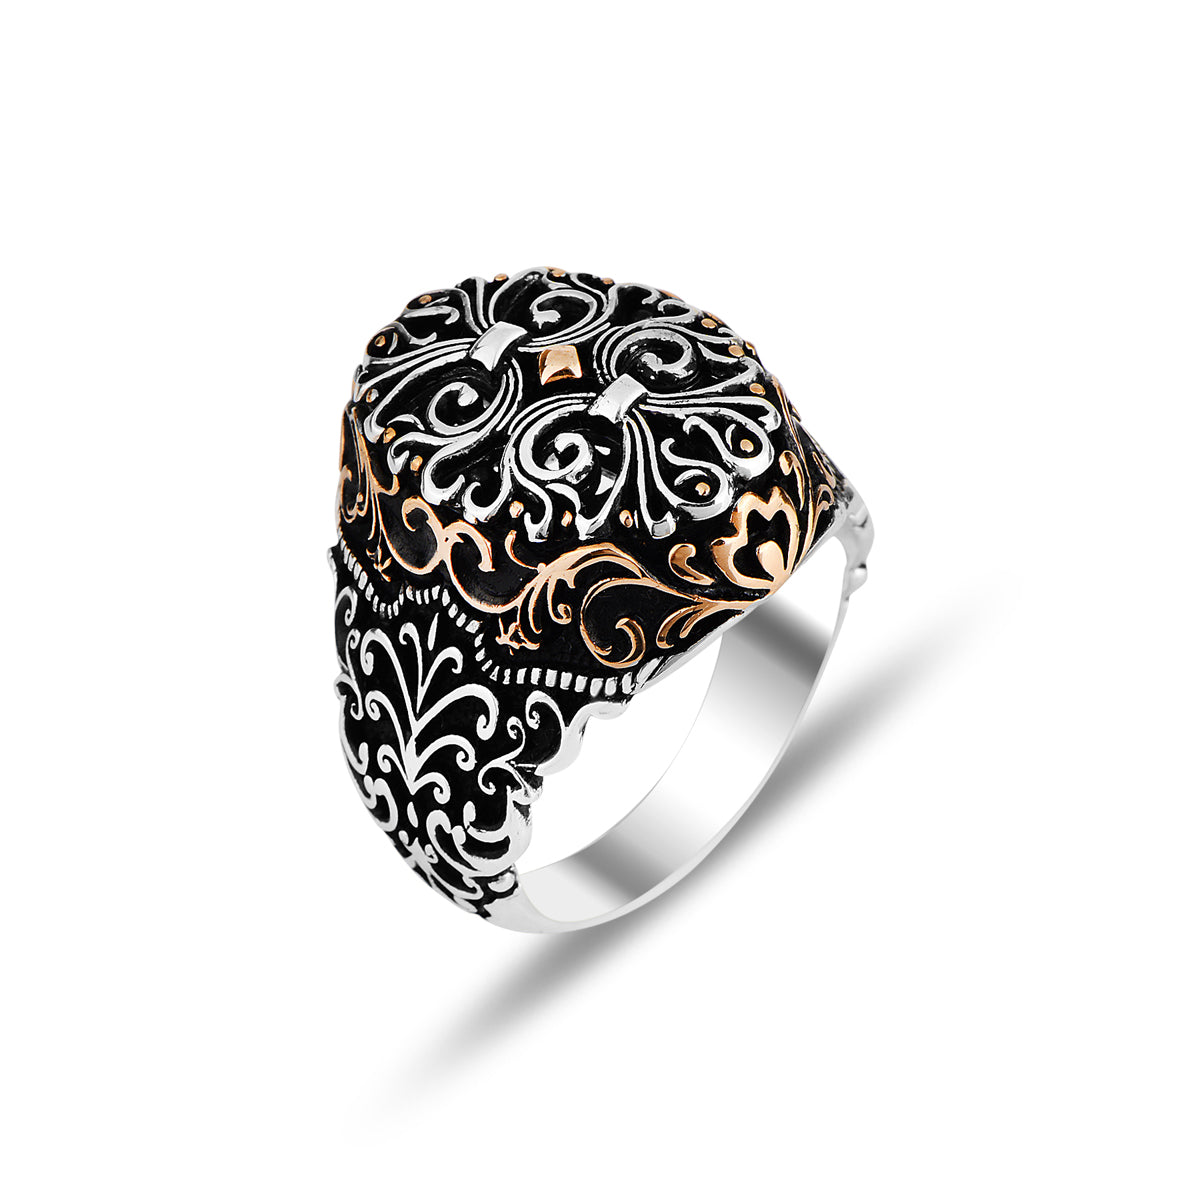 Silver Handmade Embroidered Detailed Men's Ring